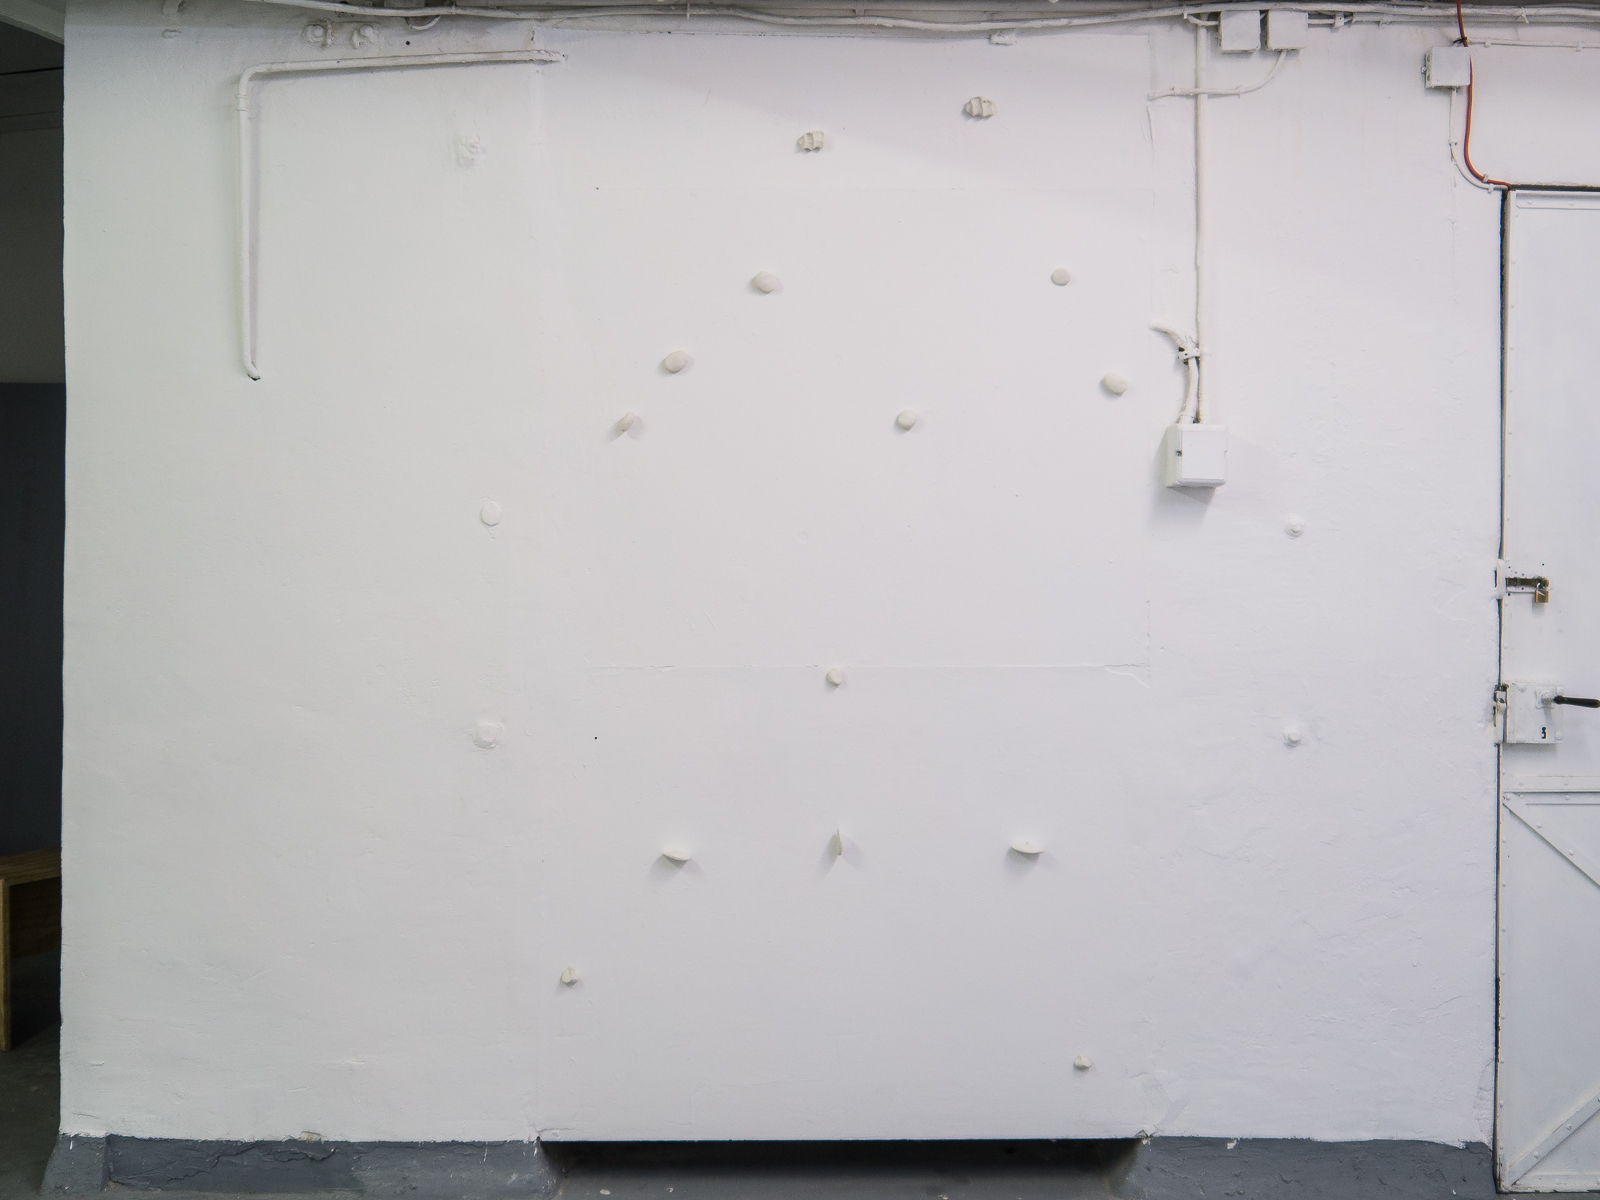 »BMI«, 2014, plaster sculptures on wall, 310  x 250 cm